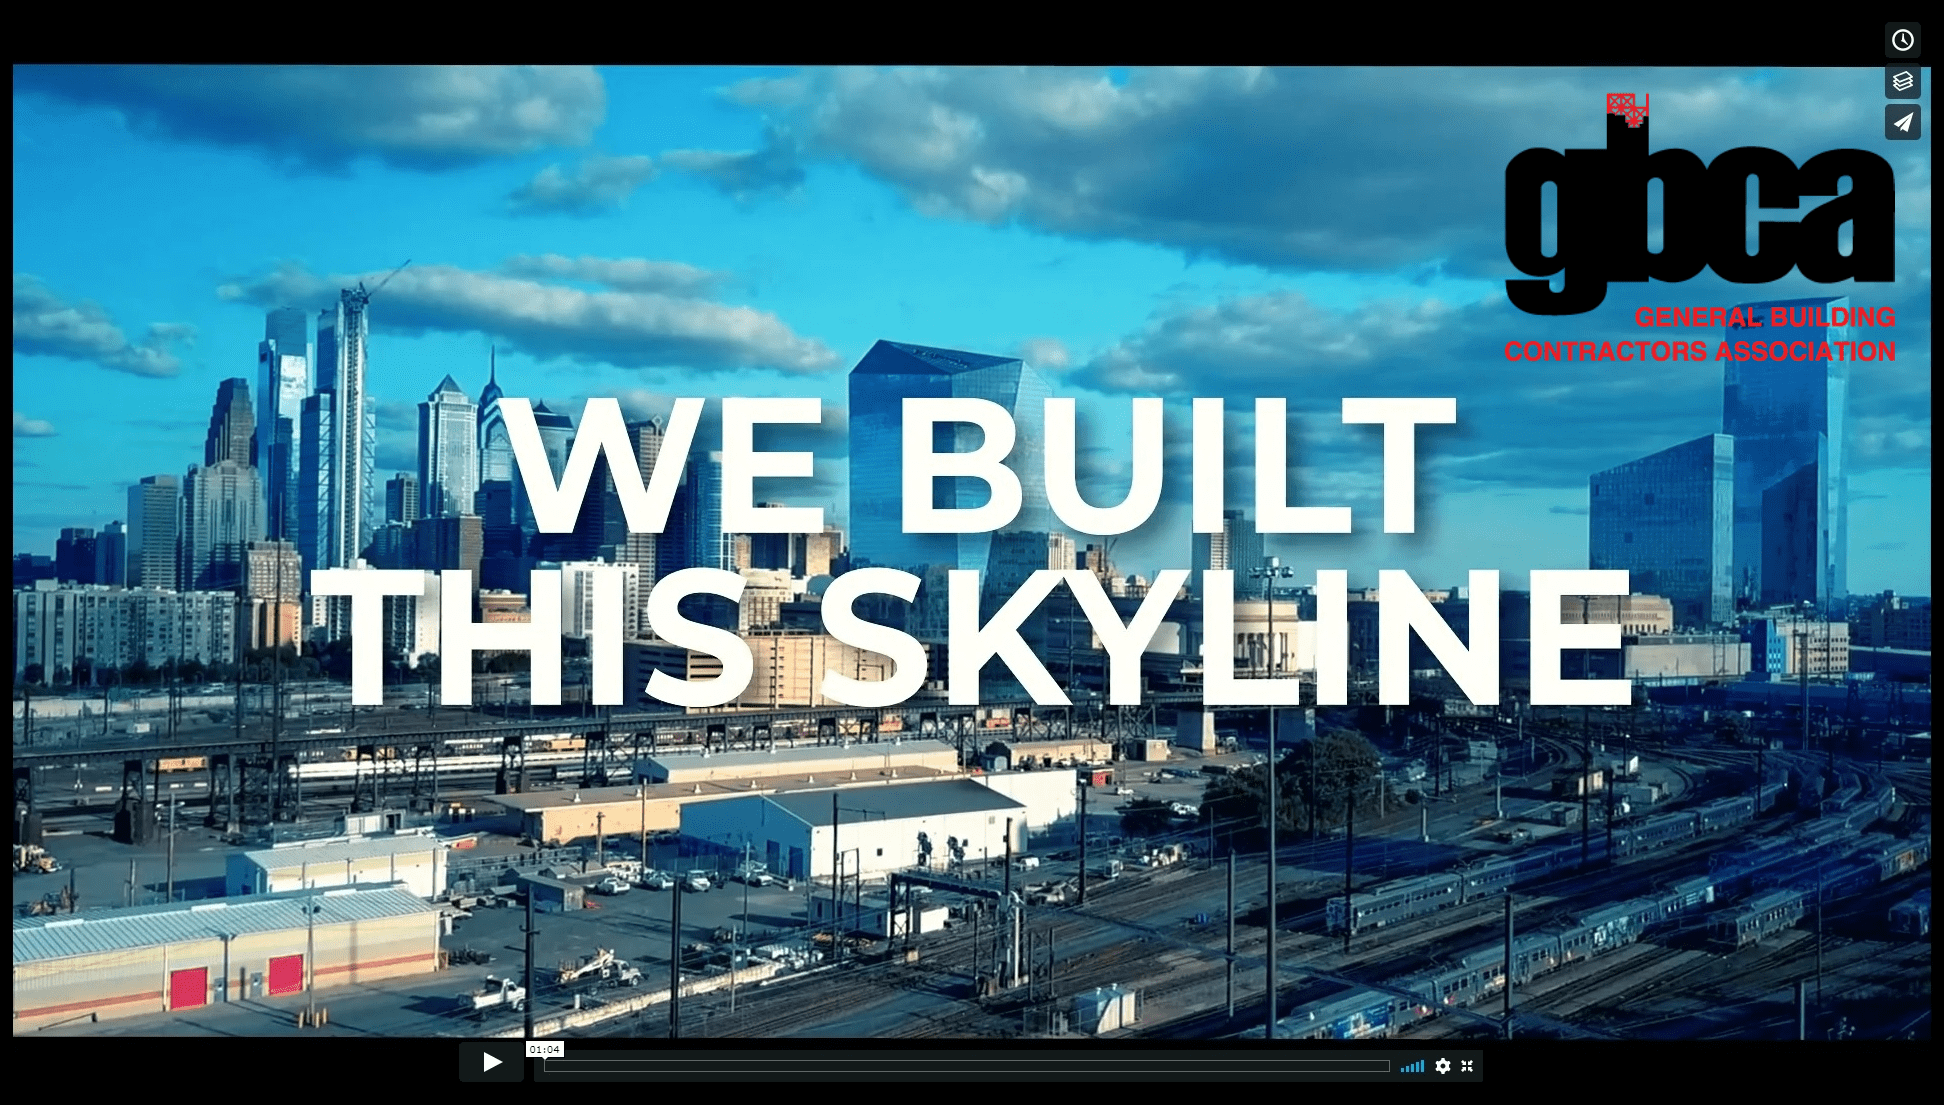 We Built This Skyline - Logo - https://s41078.pcdn.co/wp-content/uploads/2020/08/Visual-Storytelling_General-Building-Contractors-Association.png